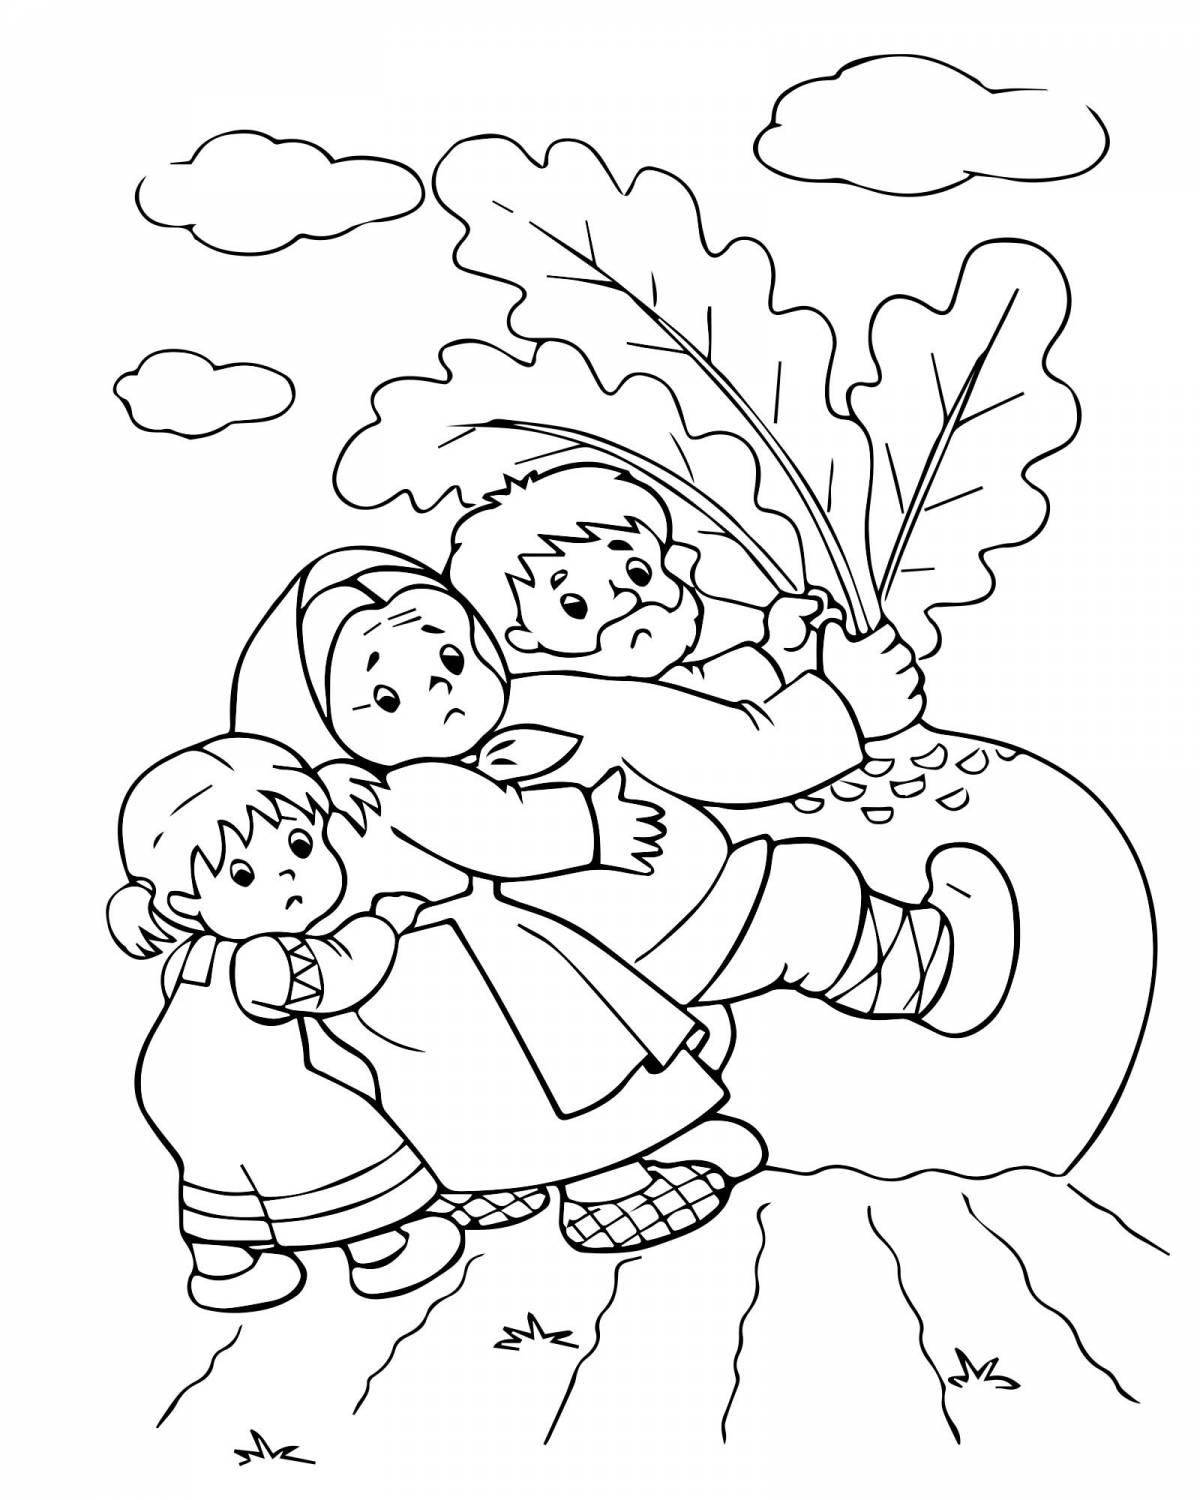 Outstanding turnip coloring page for kids